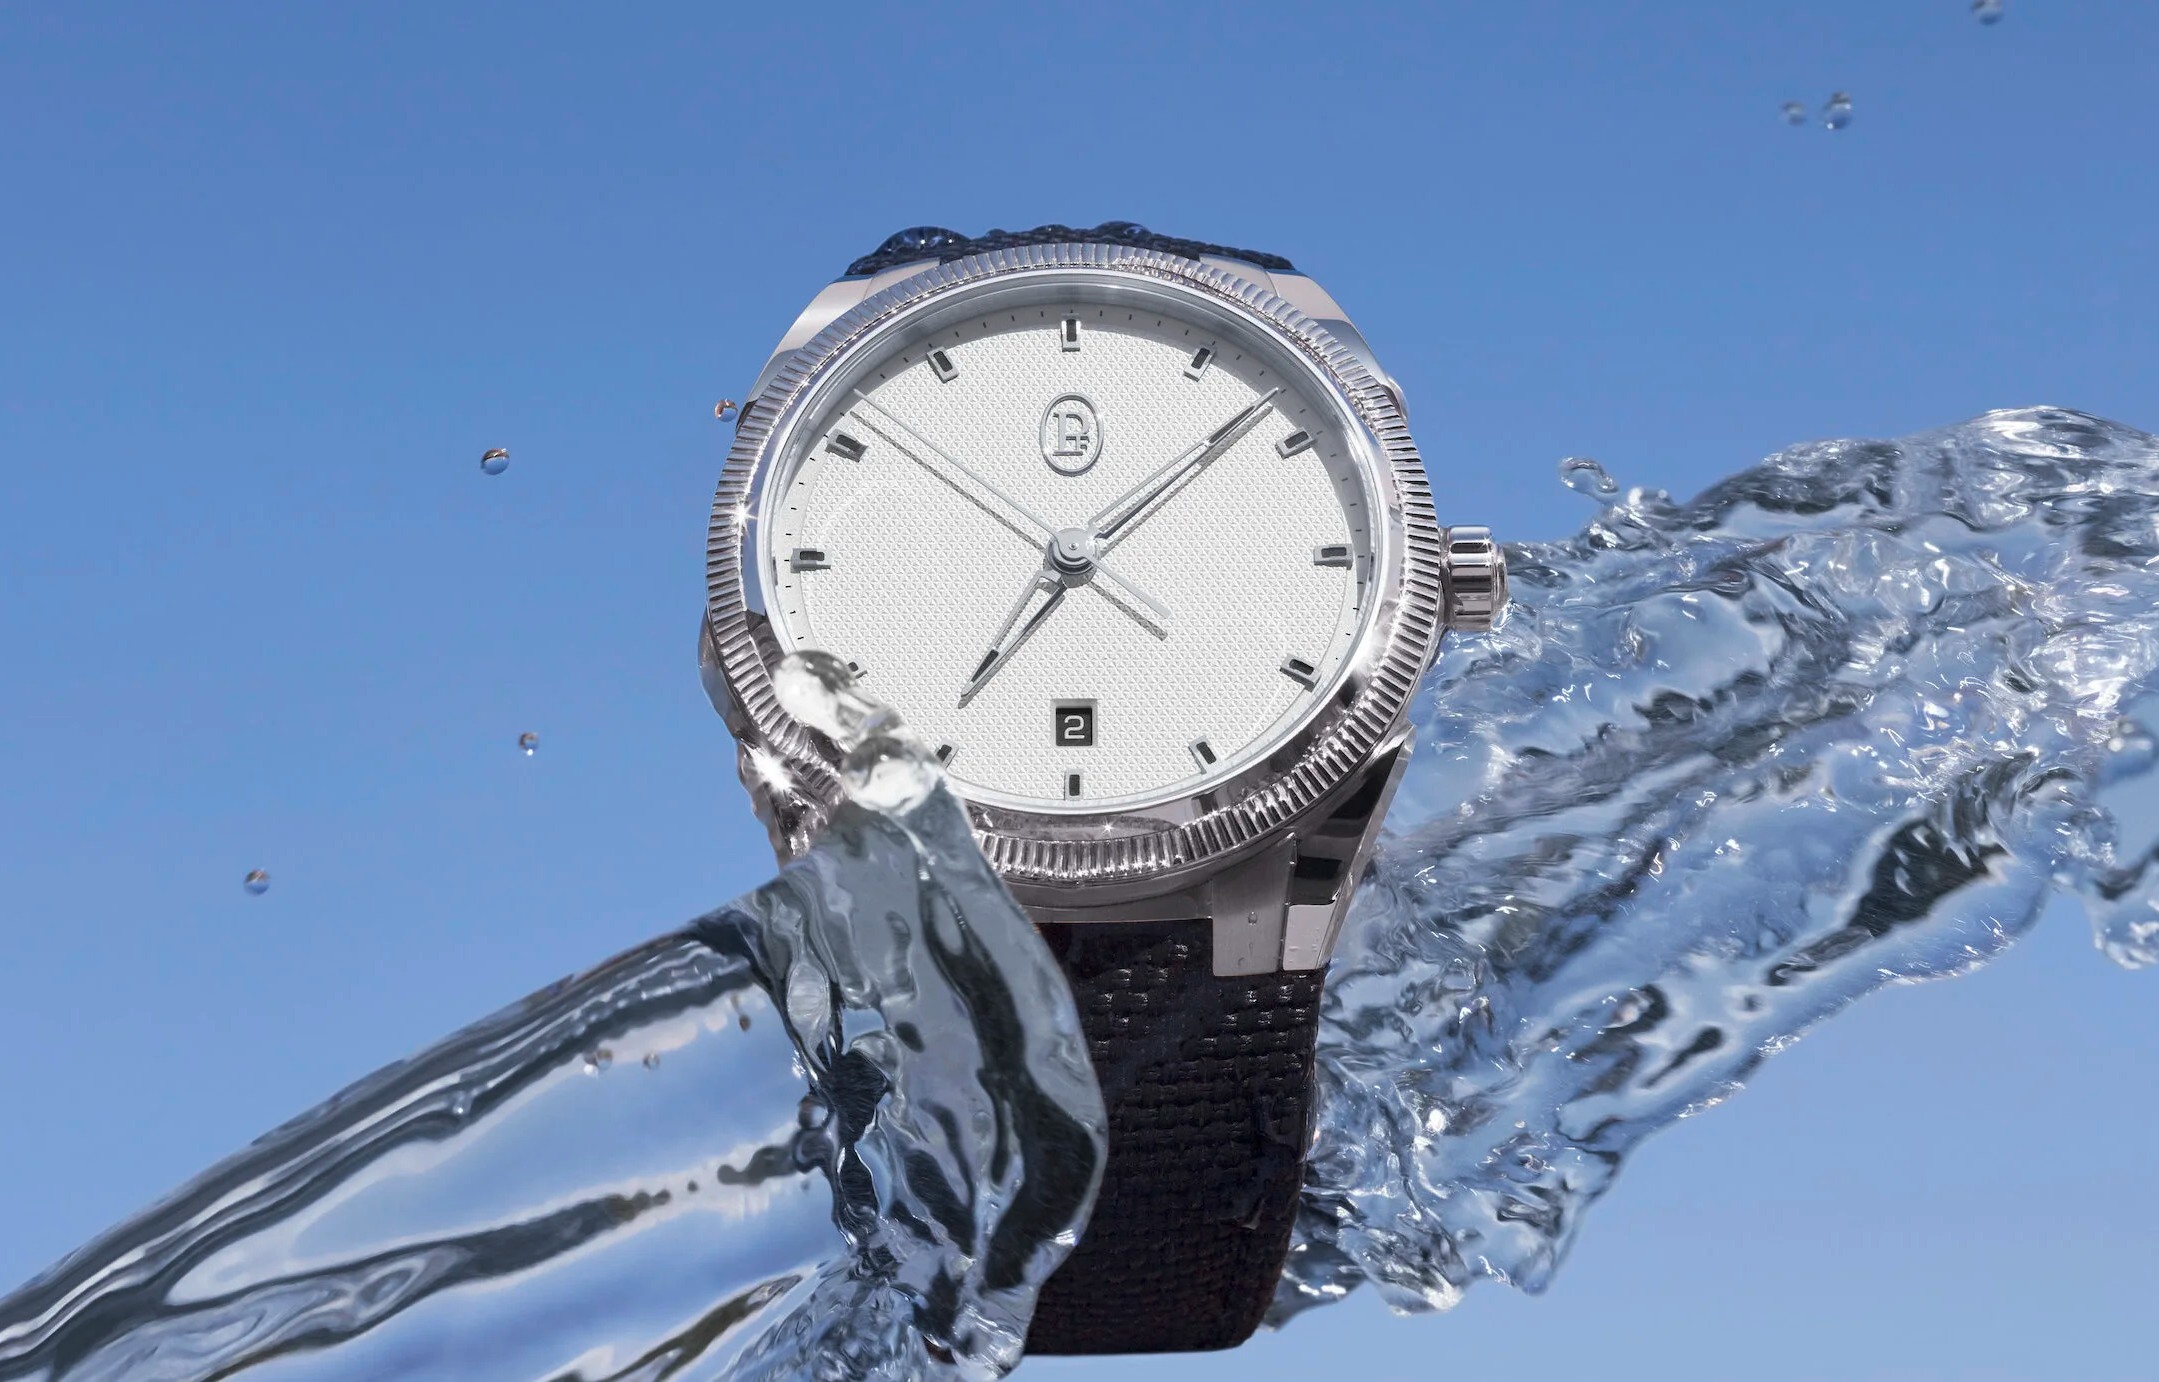 Tonda PF Sport Automatic in stainless steel.